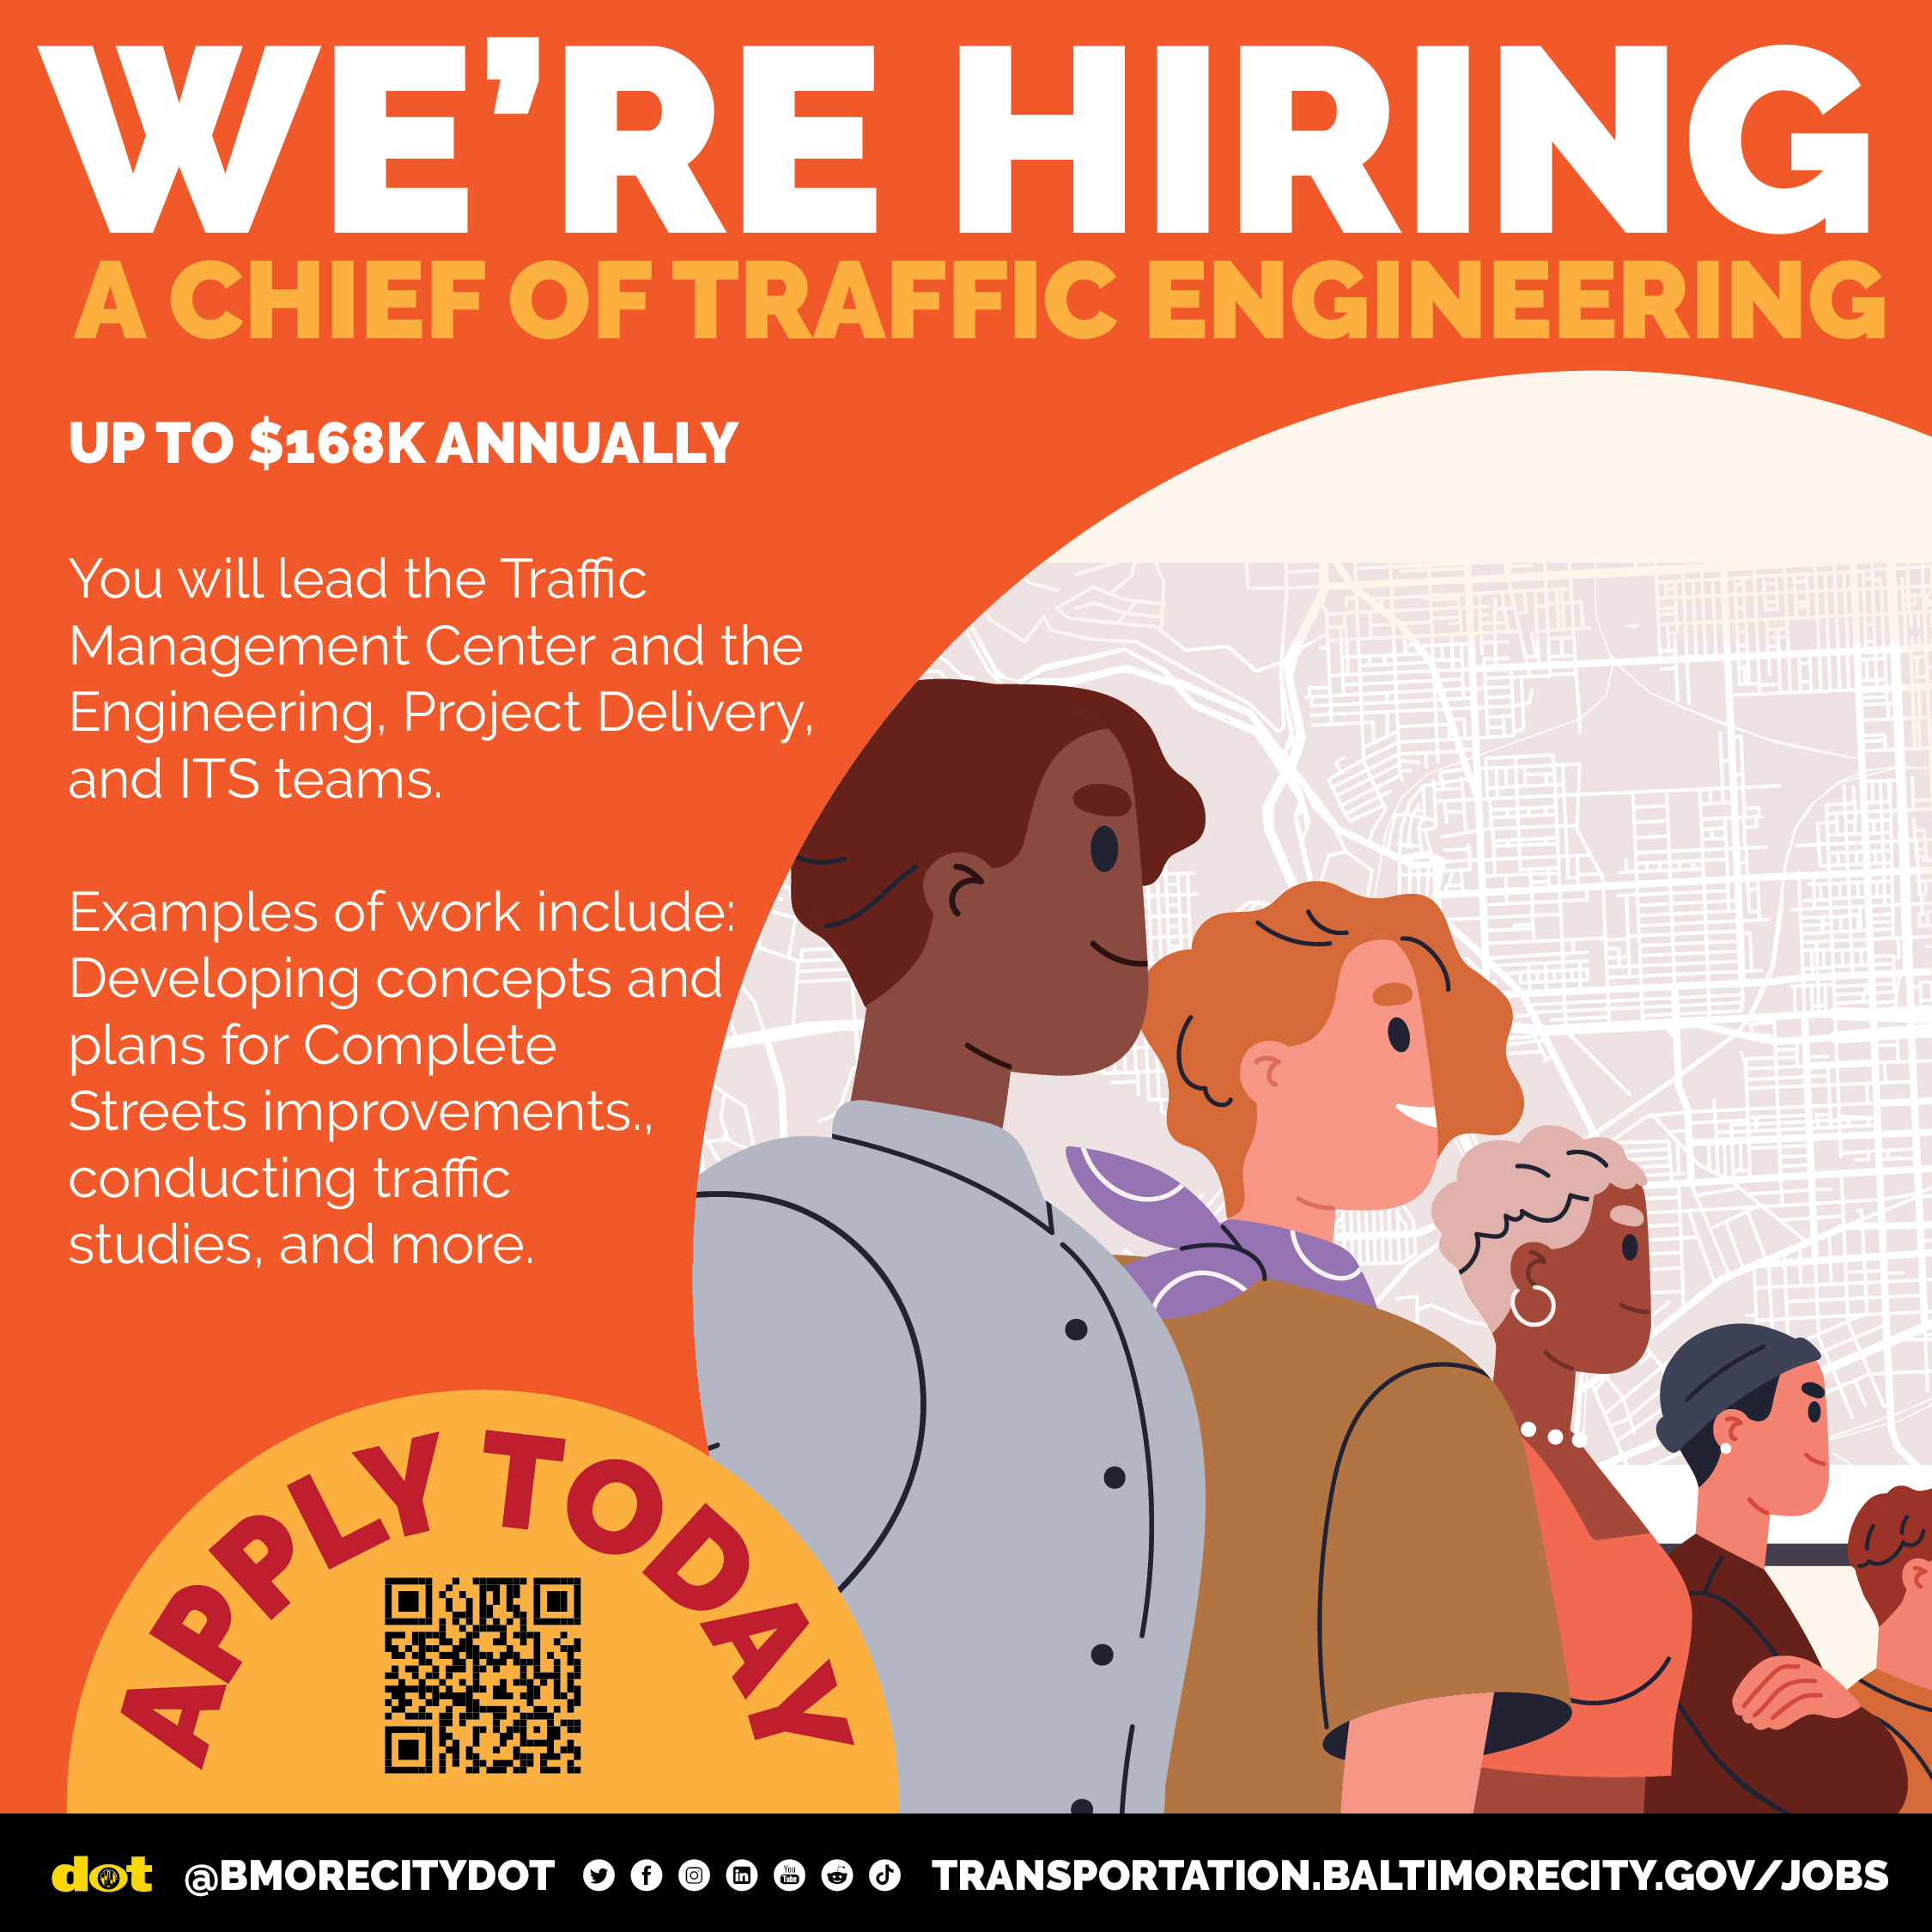 Baltimore City Department of Transportation We're Hiring Chief of Traffic Engineering